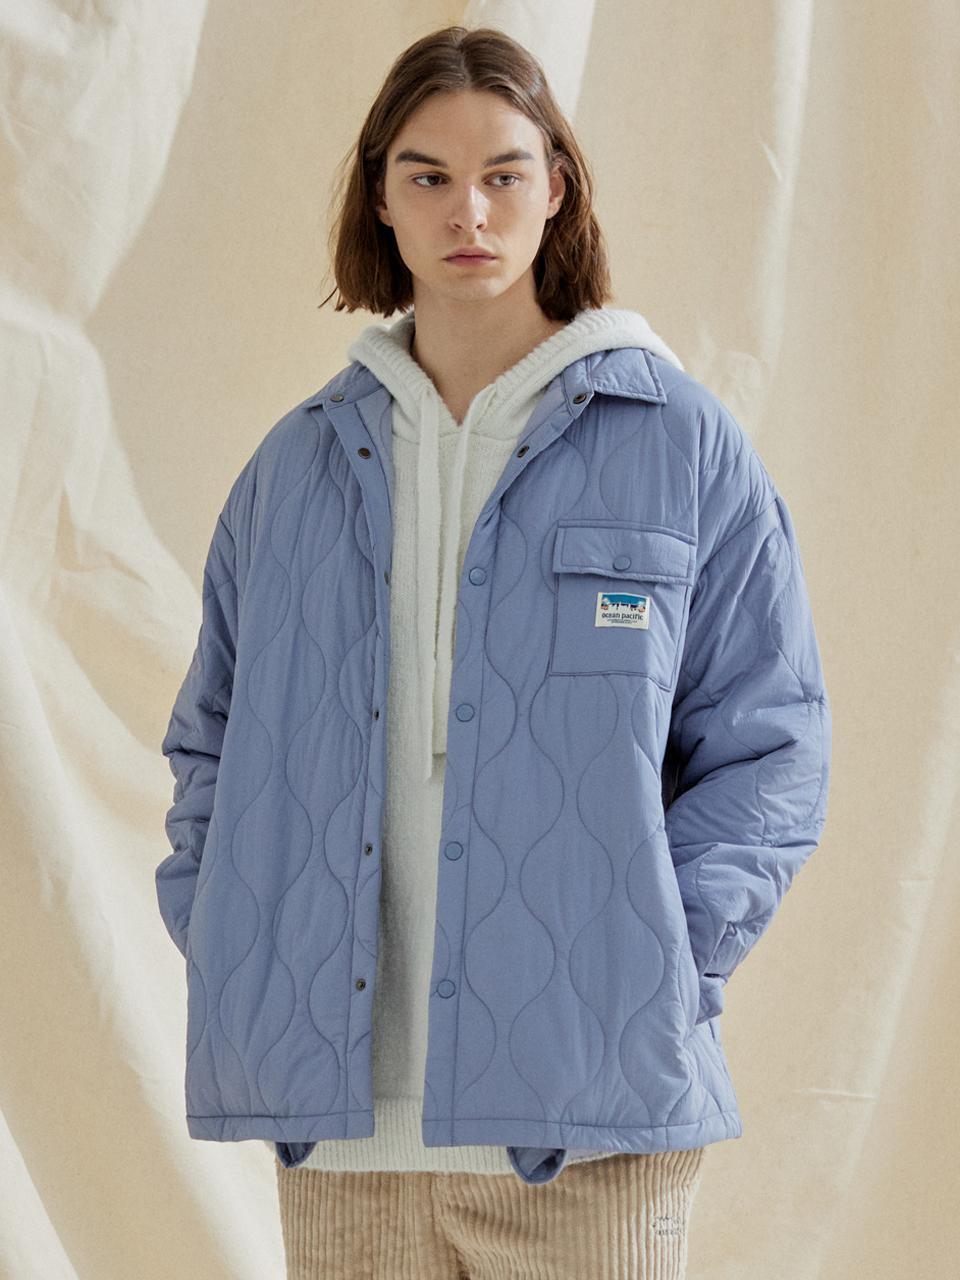 OCEAN QUILTED SHIRT JACKET [3 COLOR]